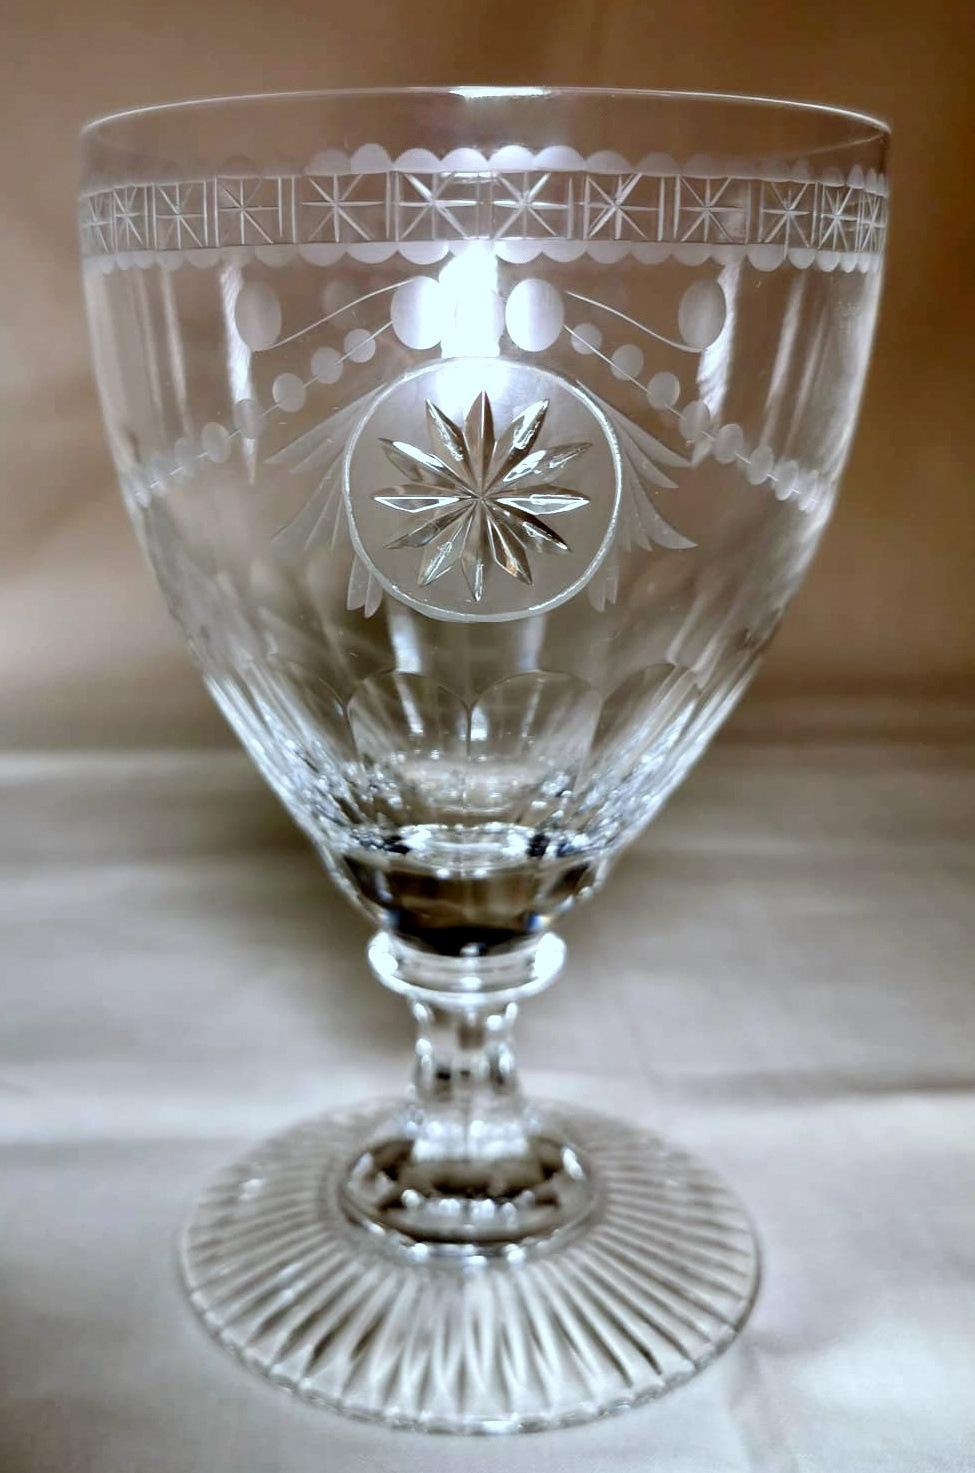 Neoclassical Yeoward William “Collection Crystal” English Goblet For Sale